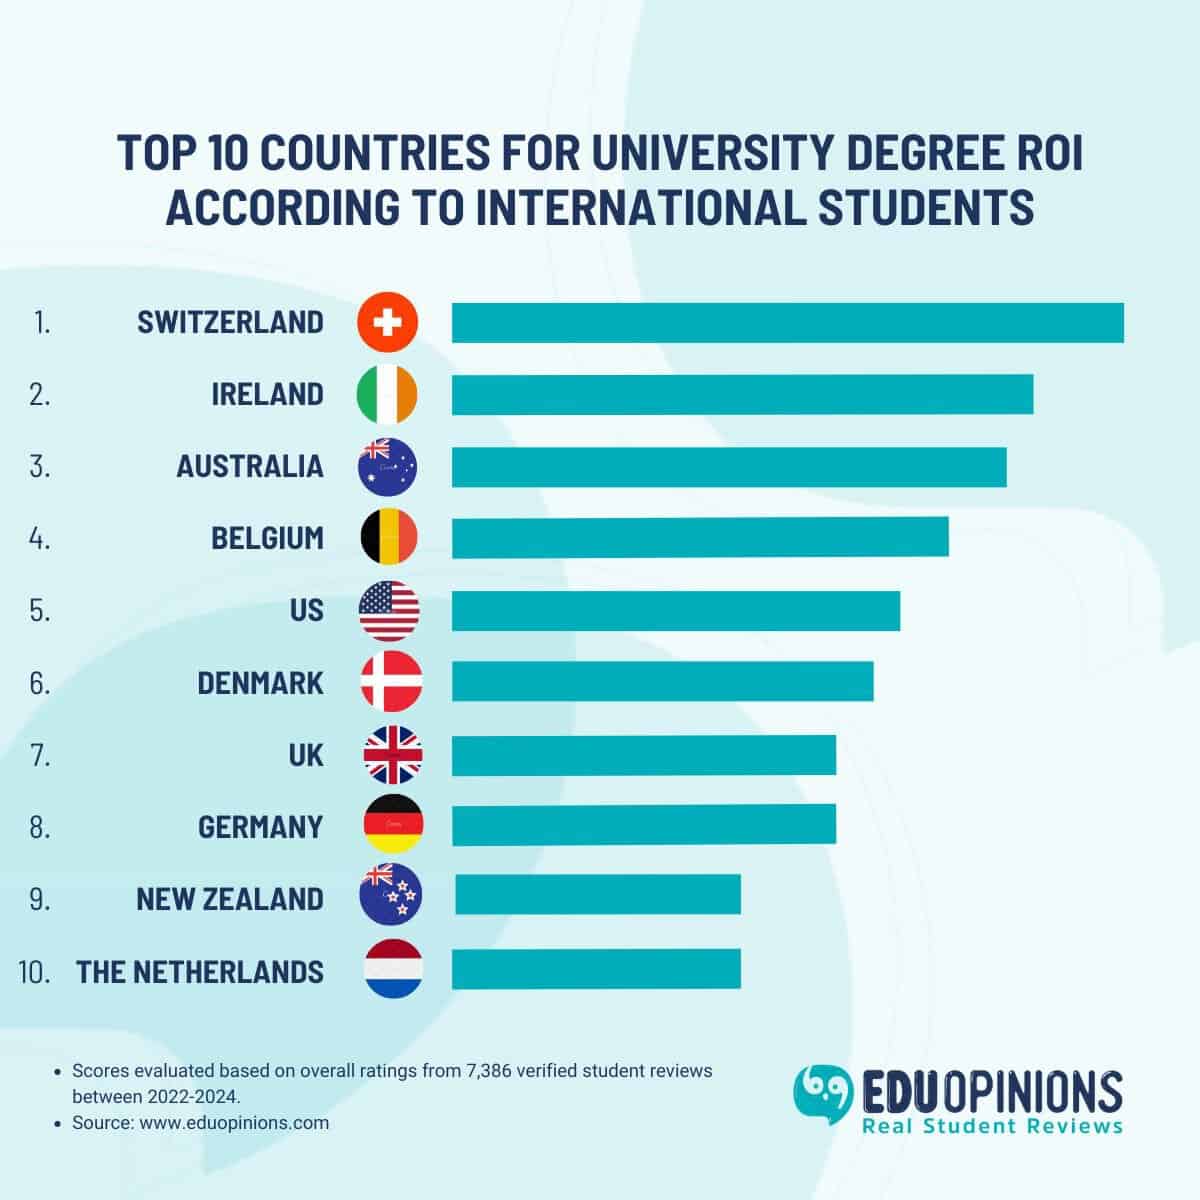 Top 10 Countries for University Degree ROI for International Students